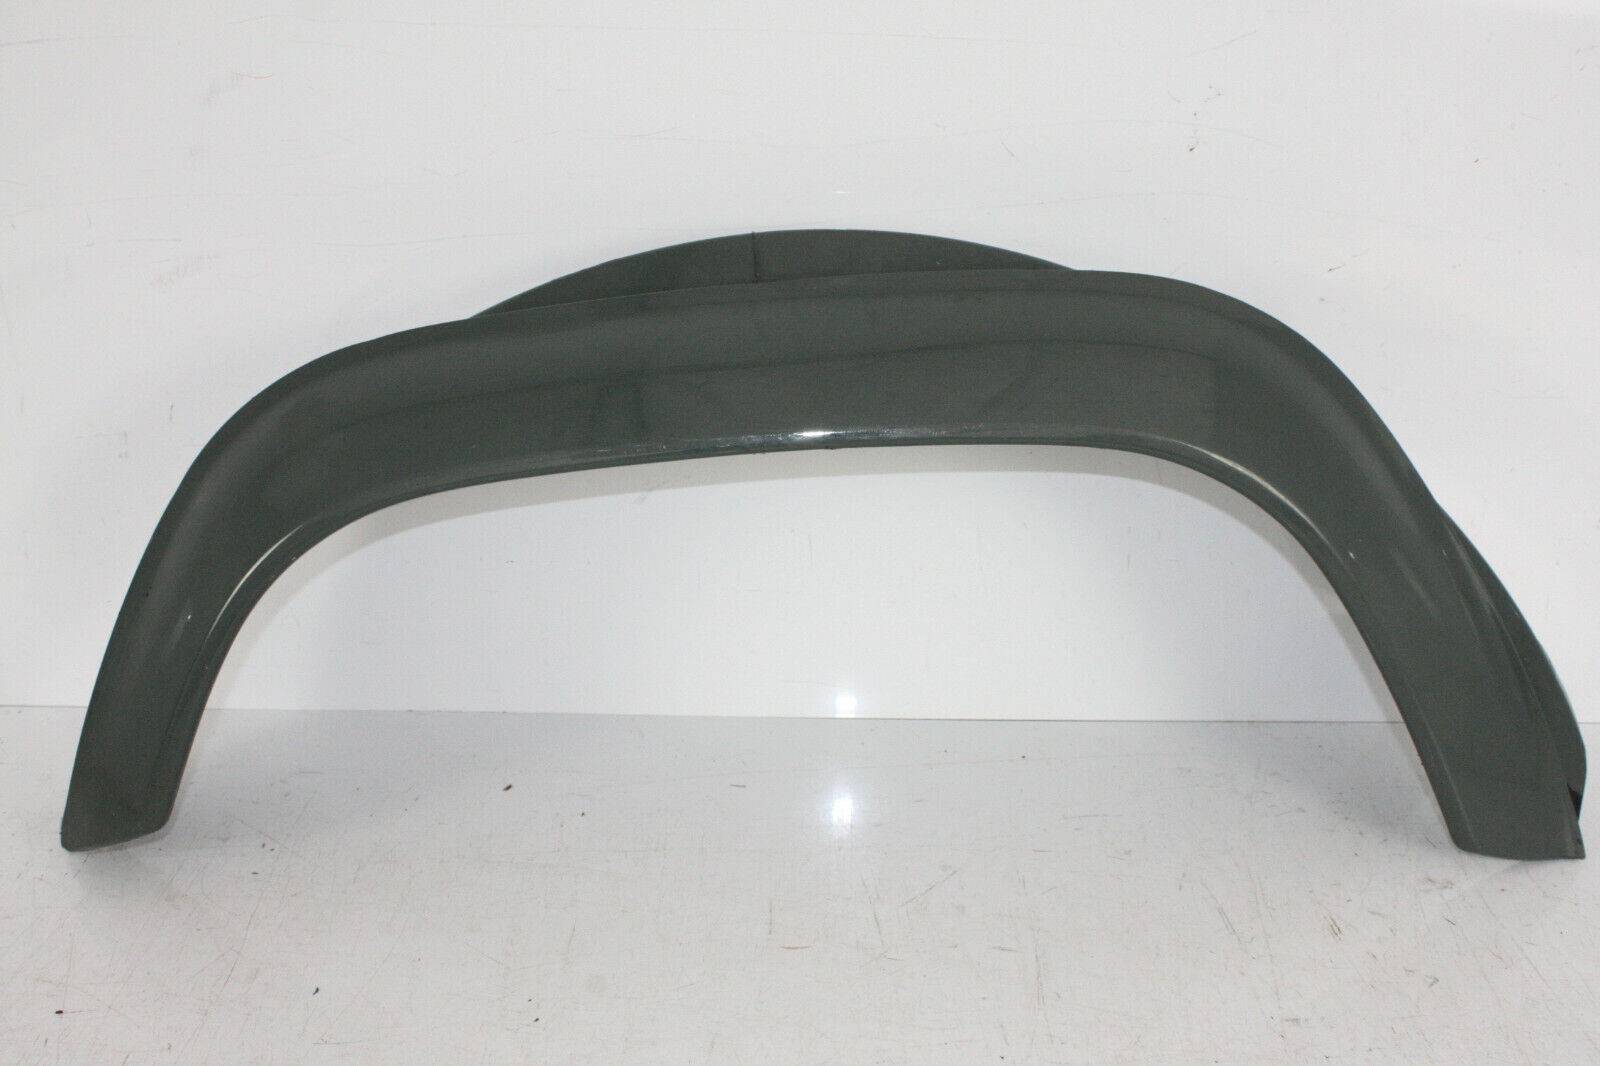 Land-Rover-Defender-Wheel-Arch-Flare-Spat-Front-Left-Painted-Type-Genuine-175367529954